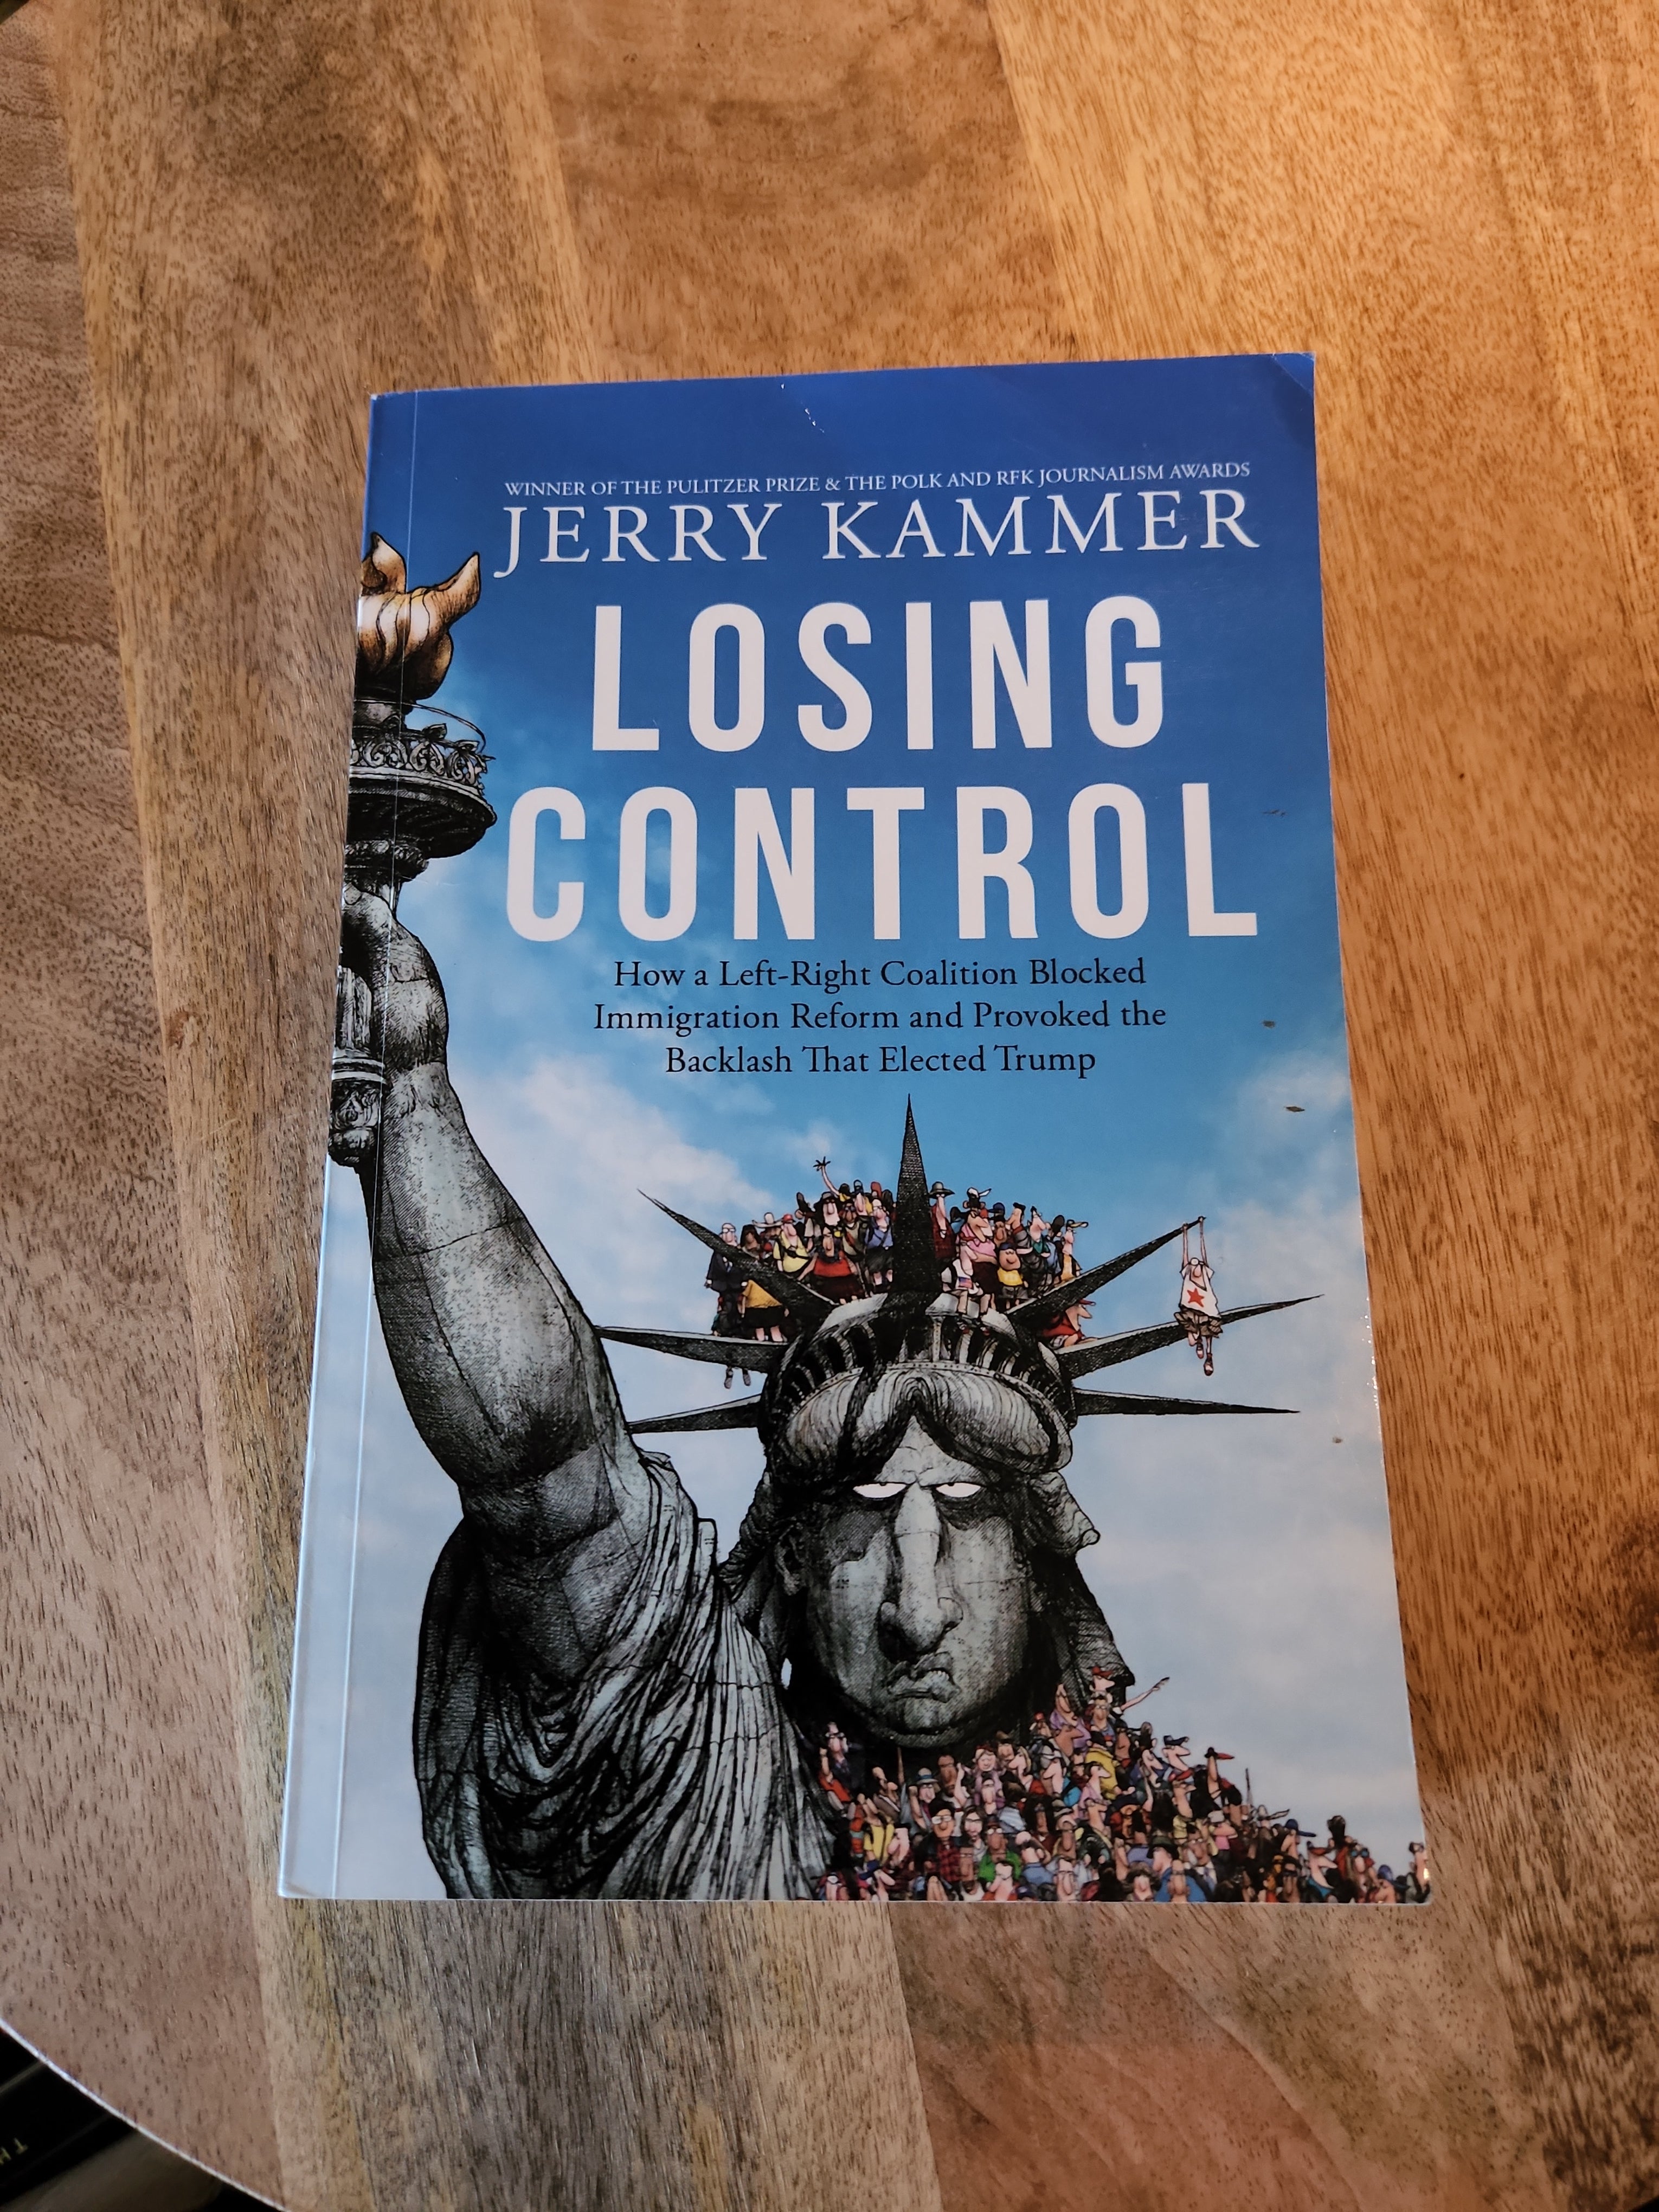 Paperback　Kammer,　Jerry　by　Control　Losing　Pangobooks